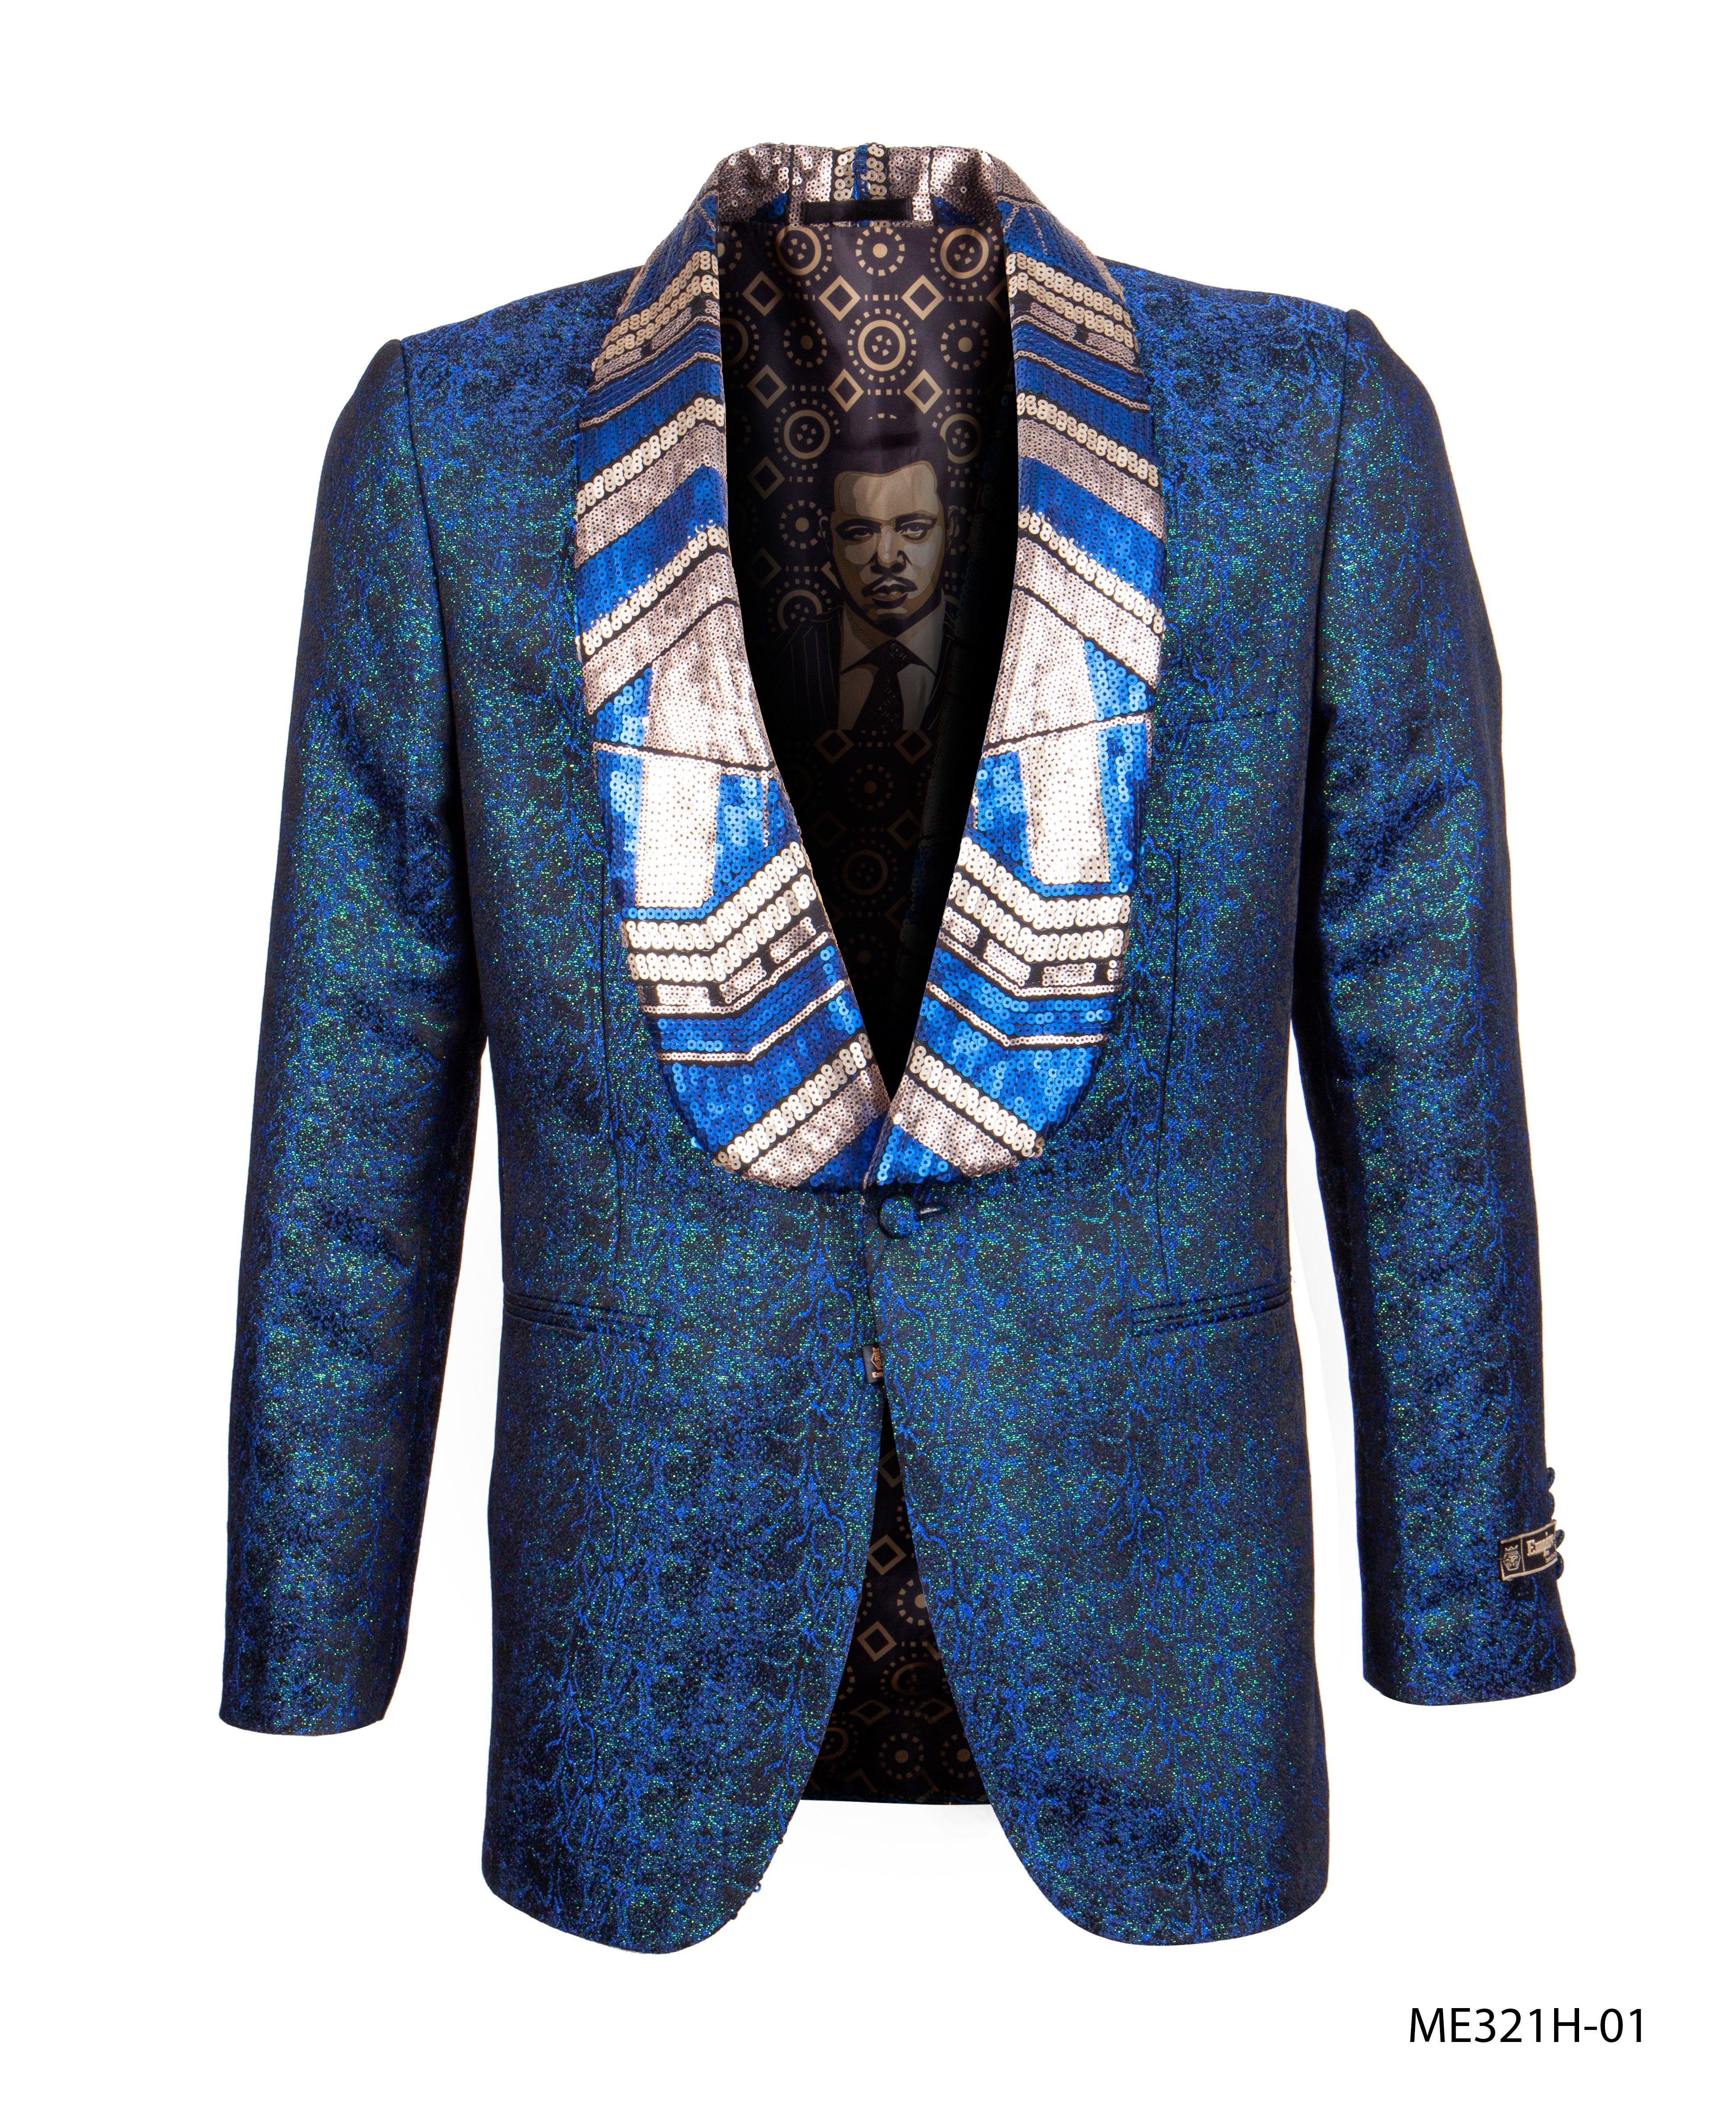 Turquoise Empire Show Blazers Formal Dinner Suit Jackets For Men ME316H-01